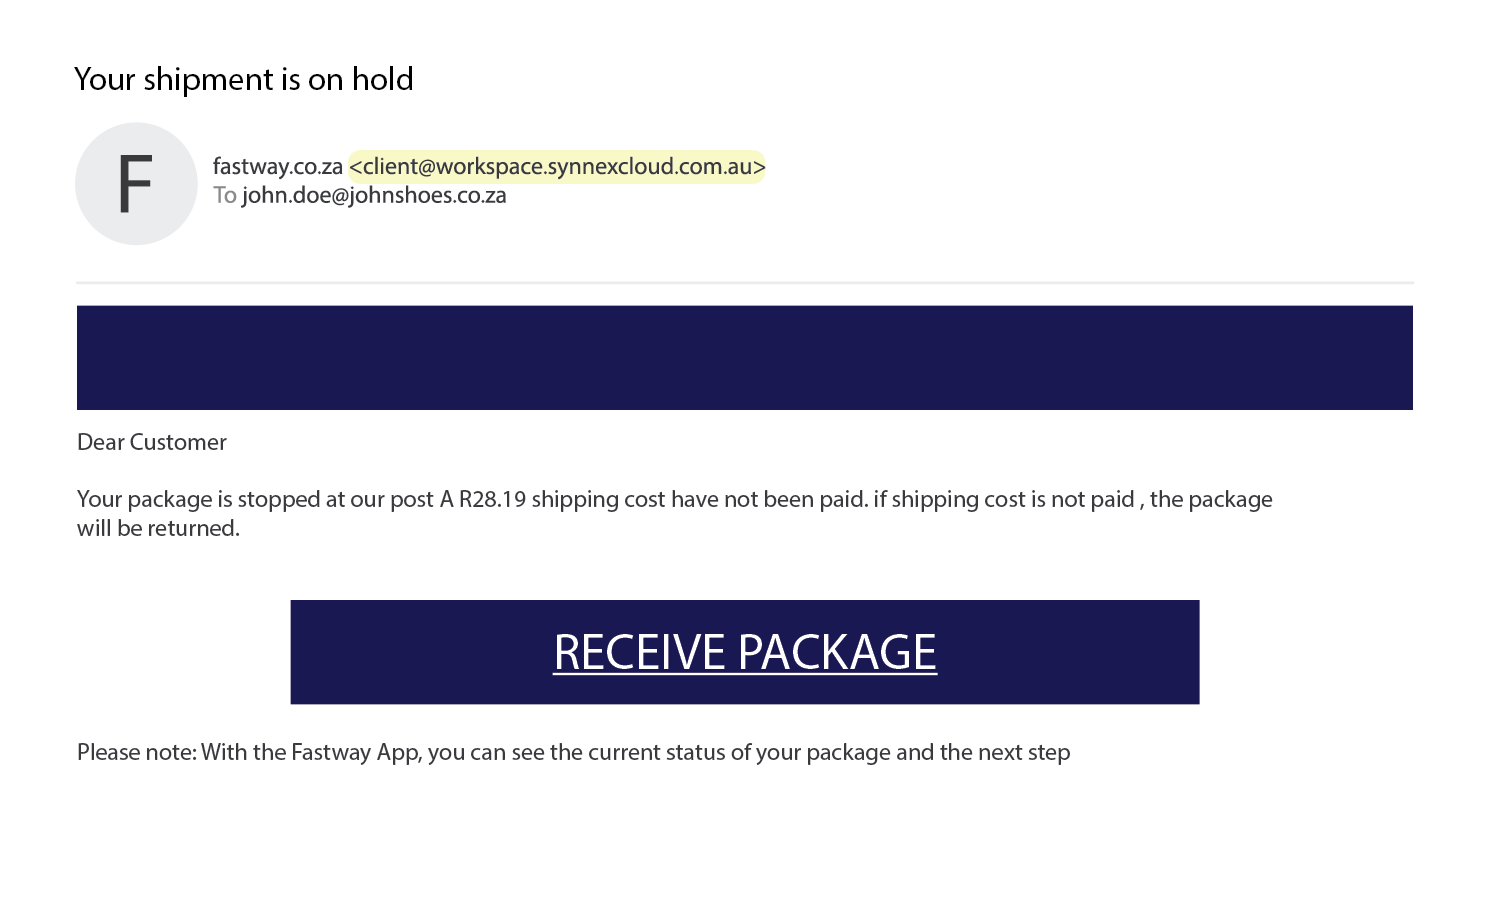 An example of what a Phishing email may look like - notice the highlighted email address spoofing to look like it comes from Fastway Couriers and the grammatical errors in the email body.